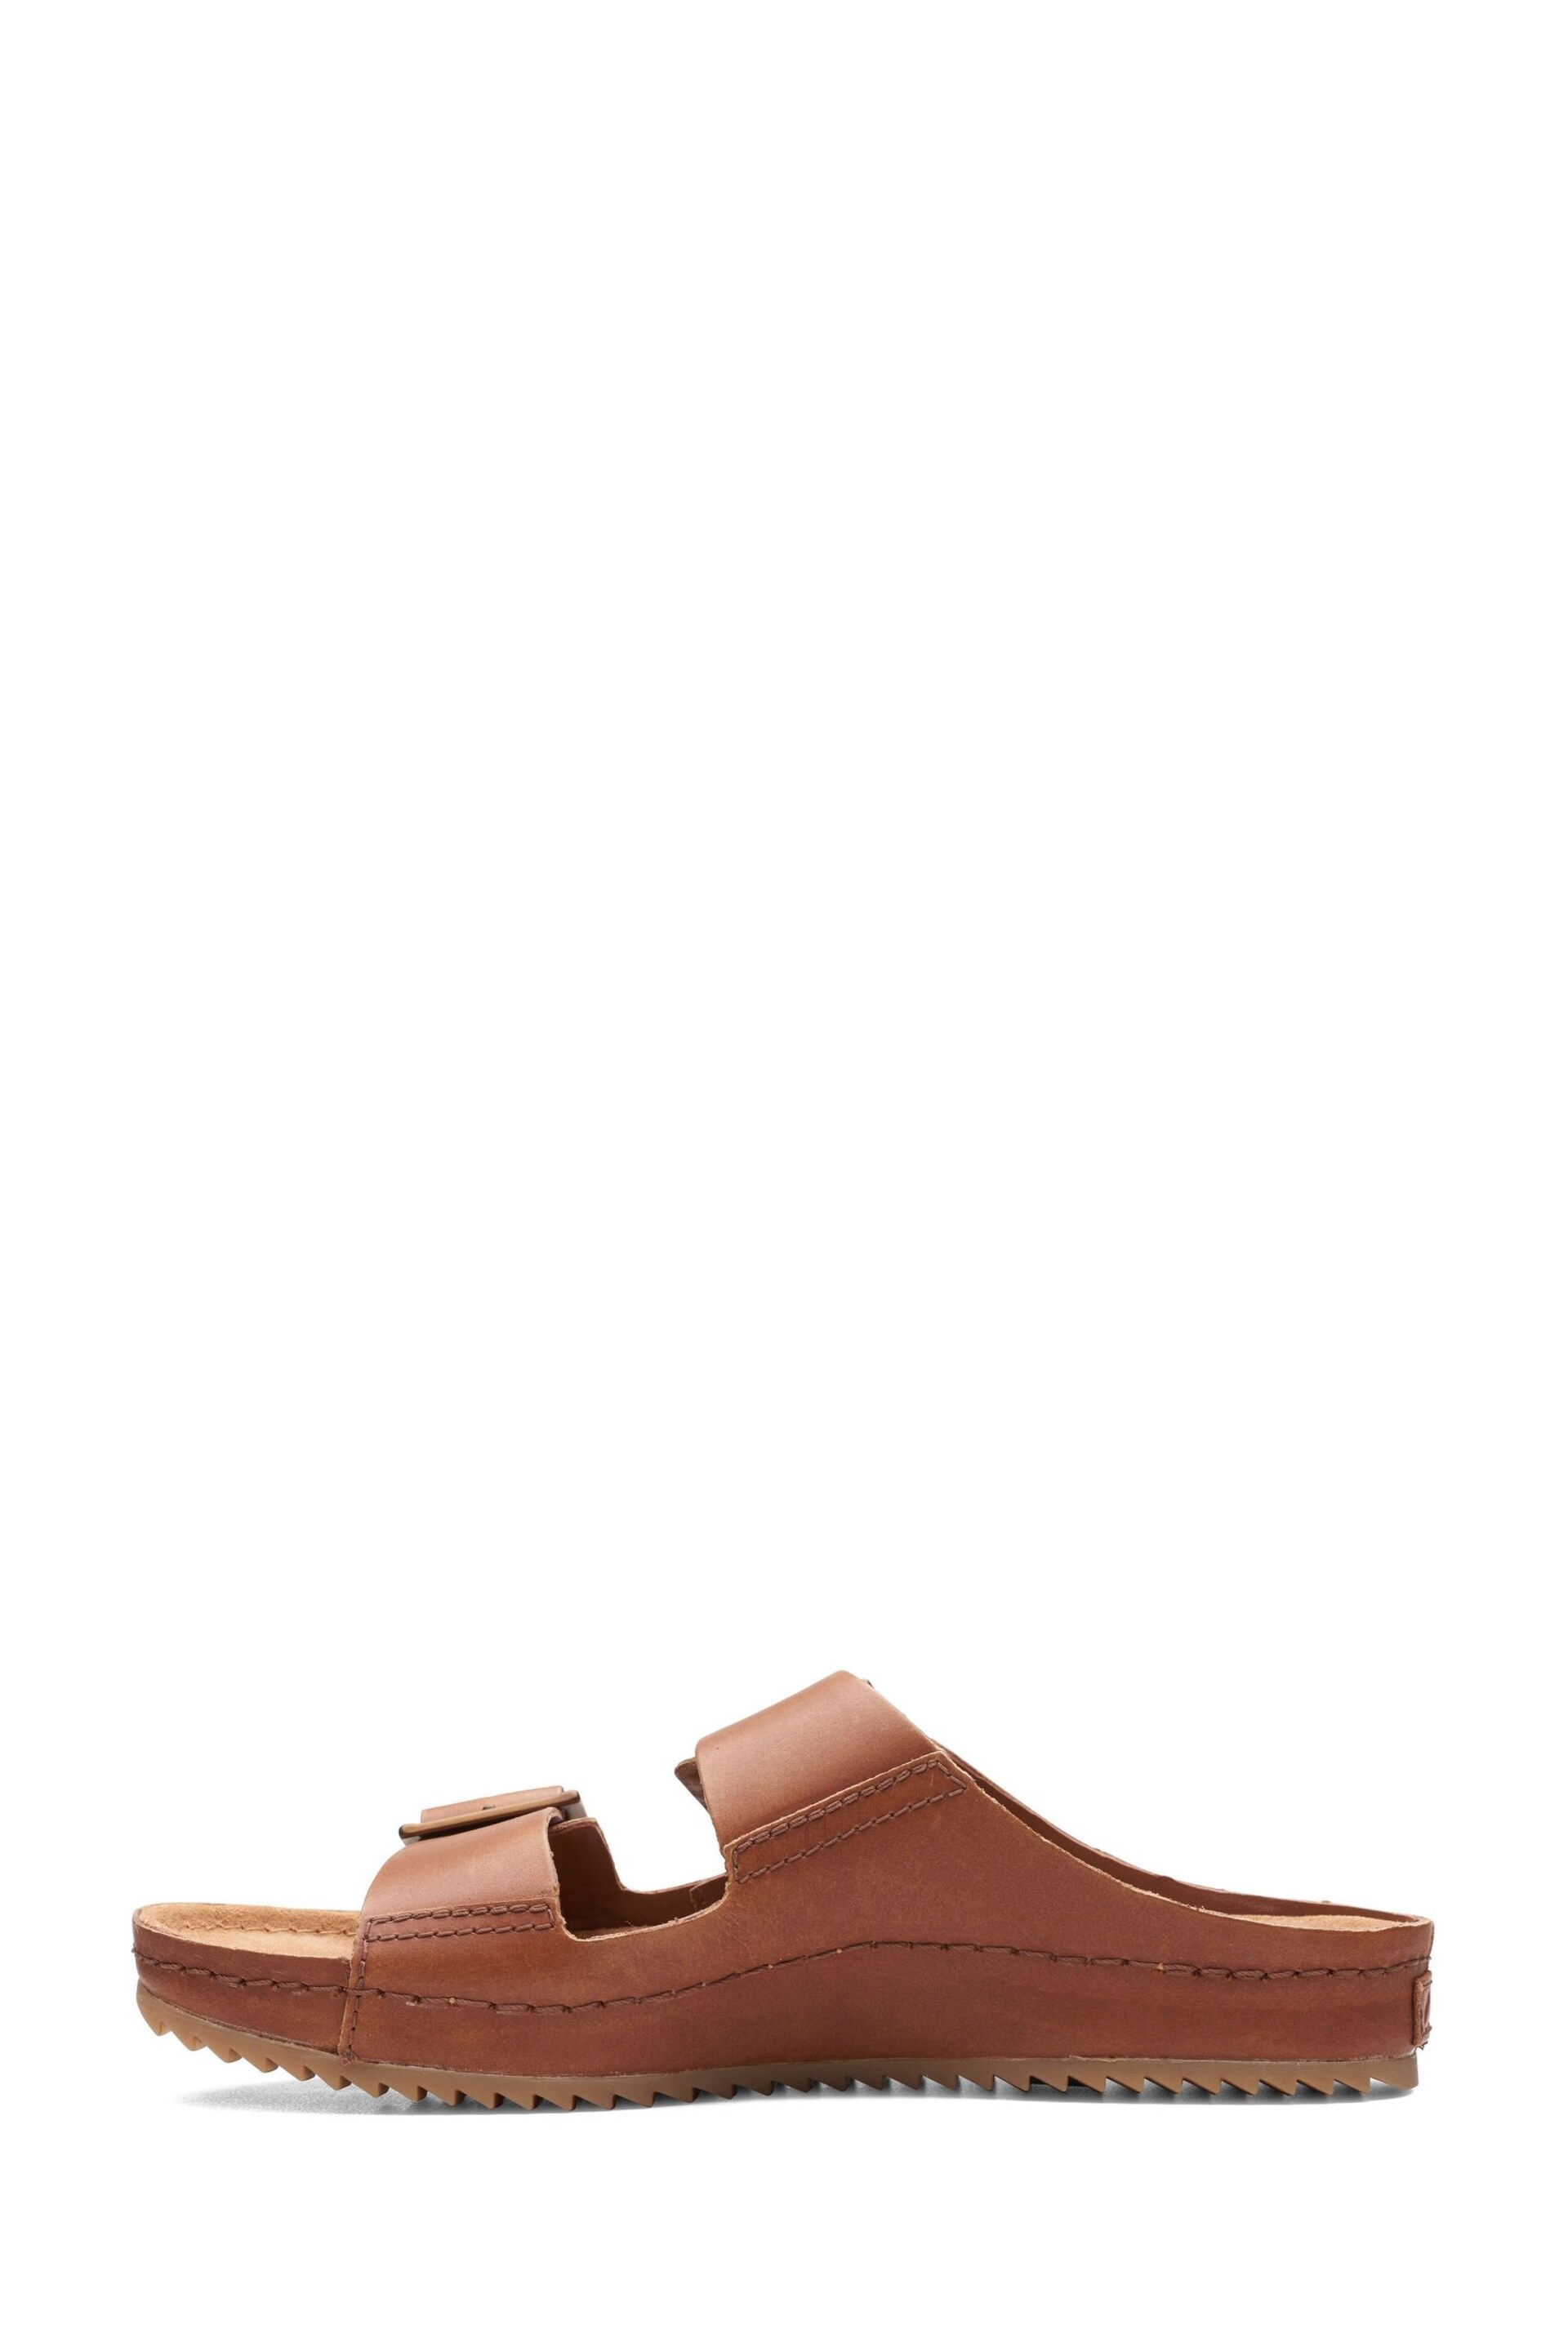 Clarks Natural Leather Brookleigh Sun Sandals - Image 2 of 7